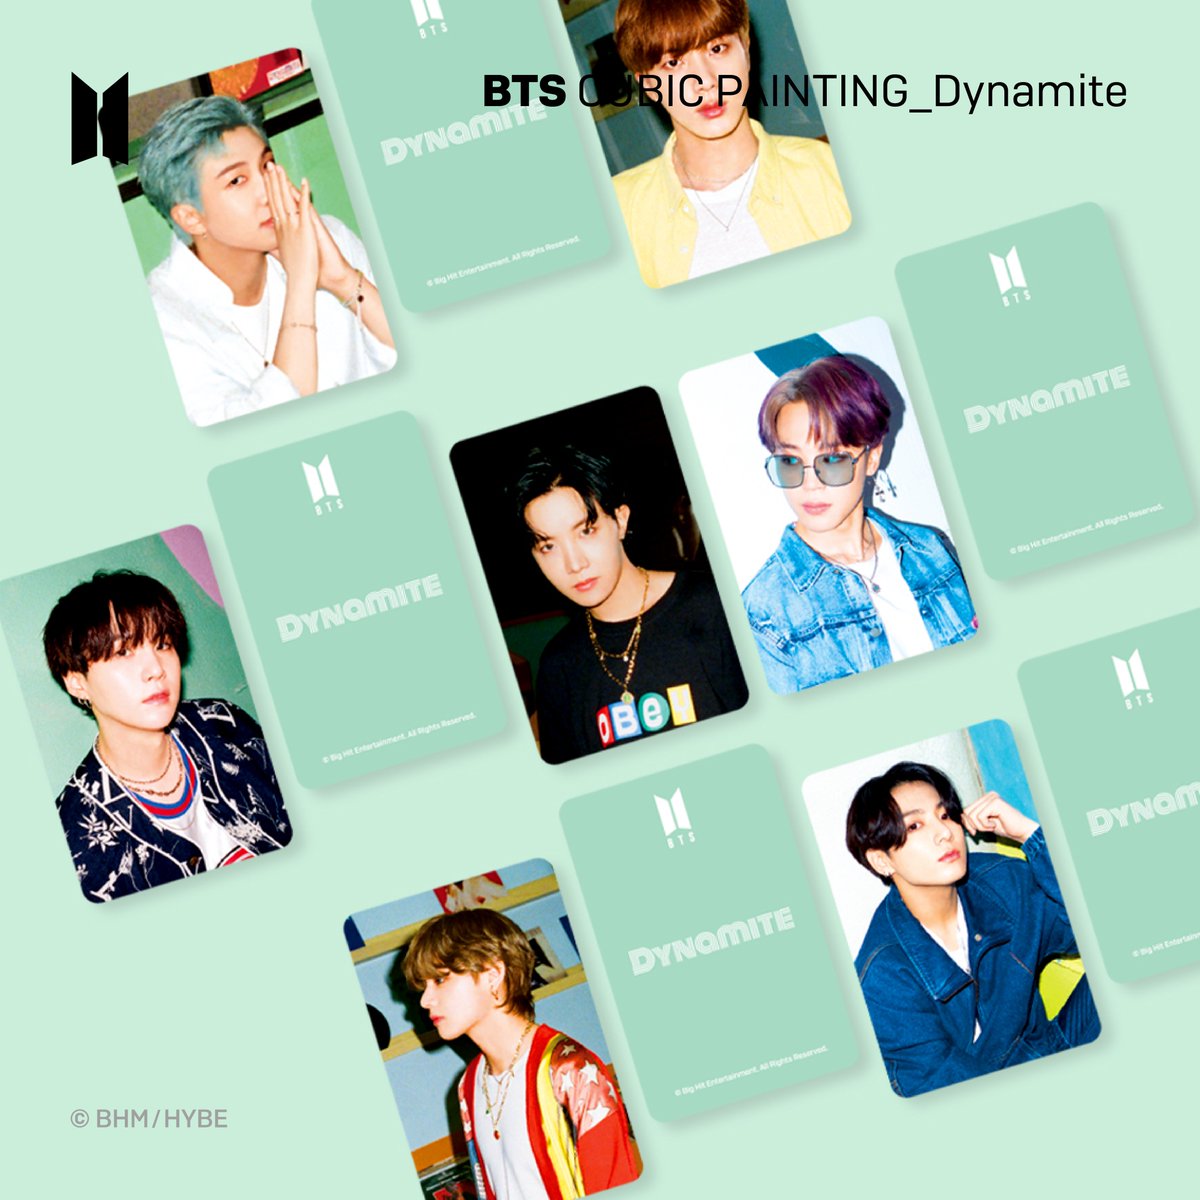 [April 2021] Newly Launched Licensed Products!BTS Dynamite  @ilovepainting__ Cubic Painting available in Japan, Korea and the USA